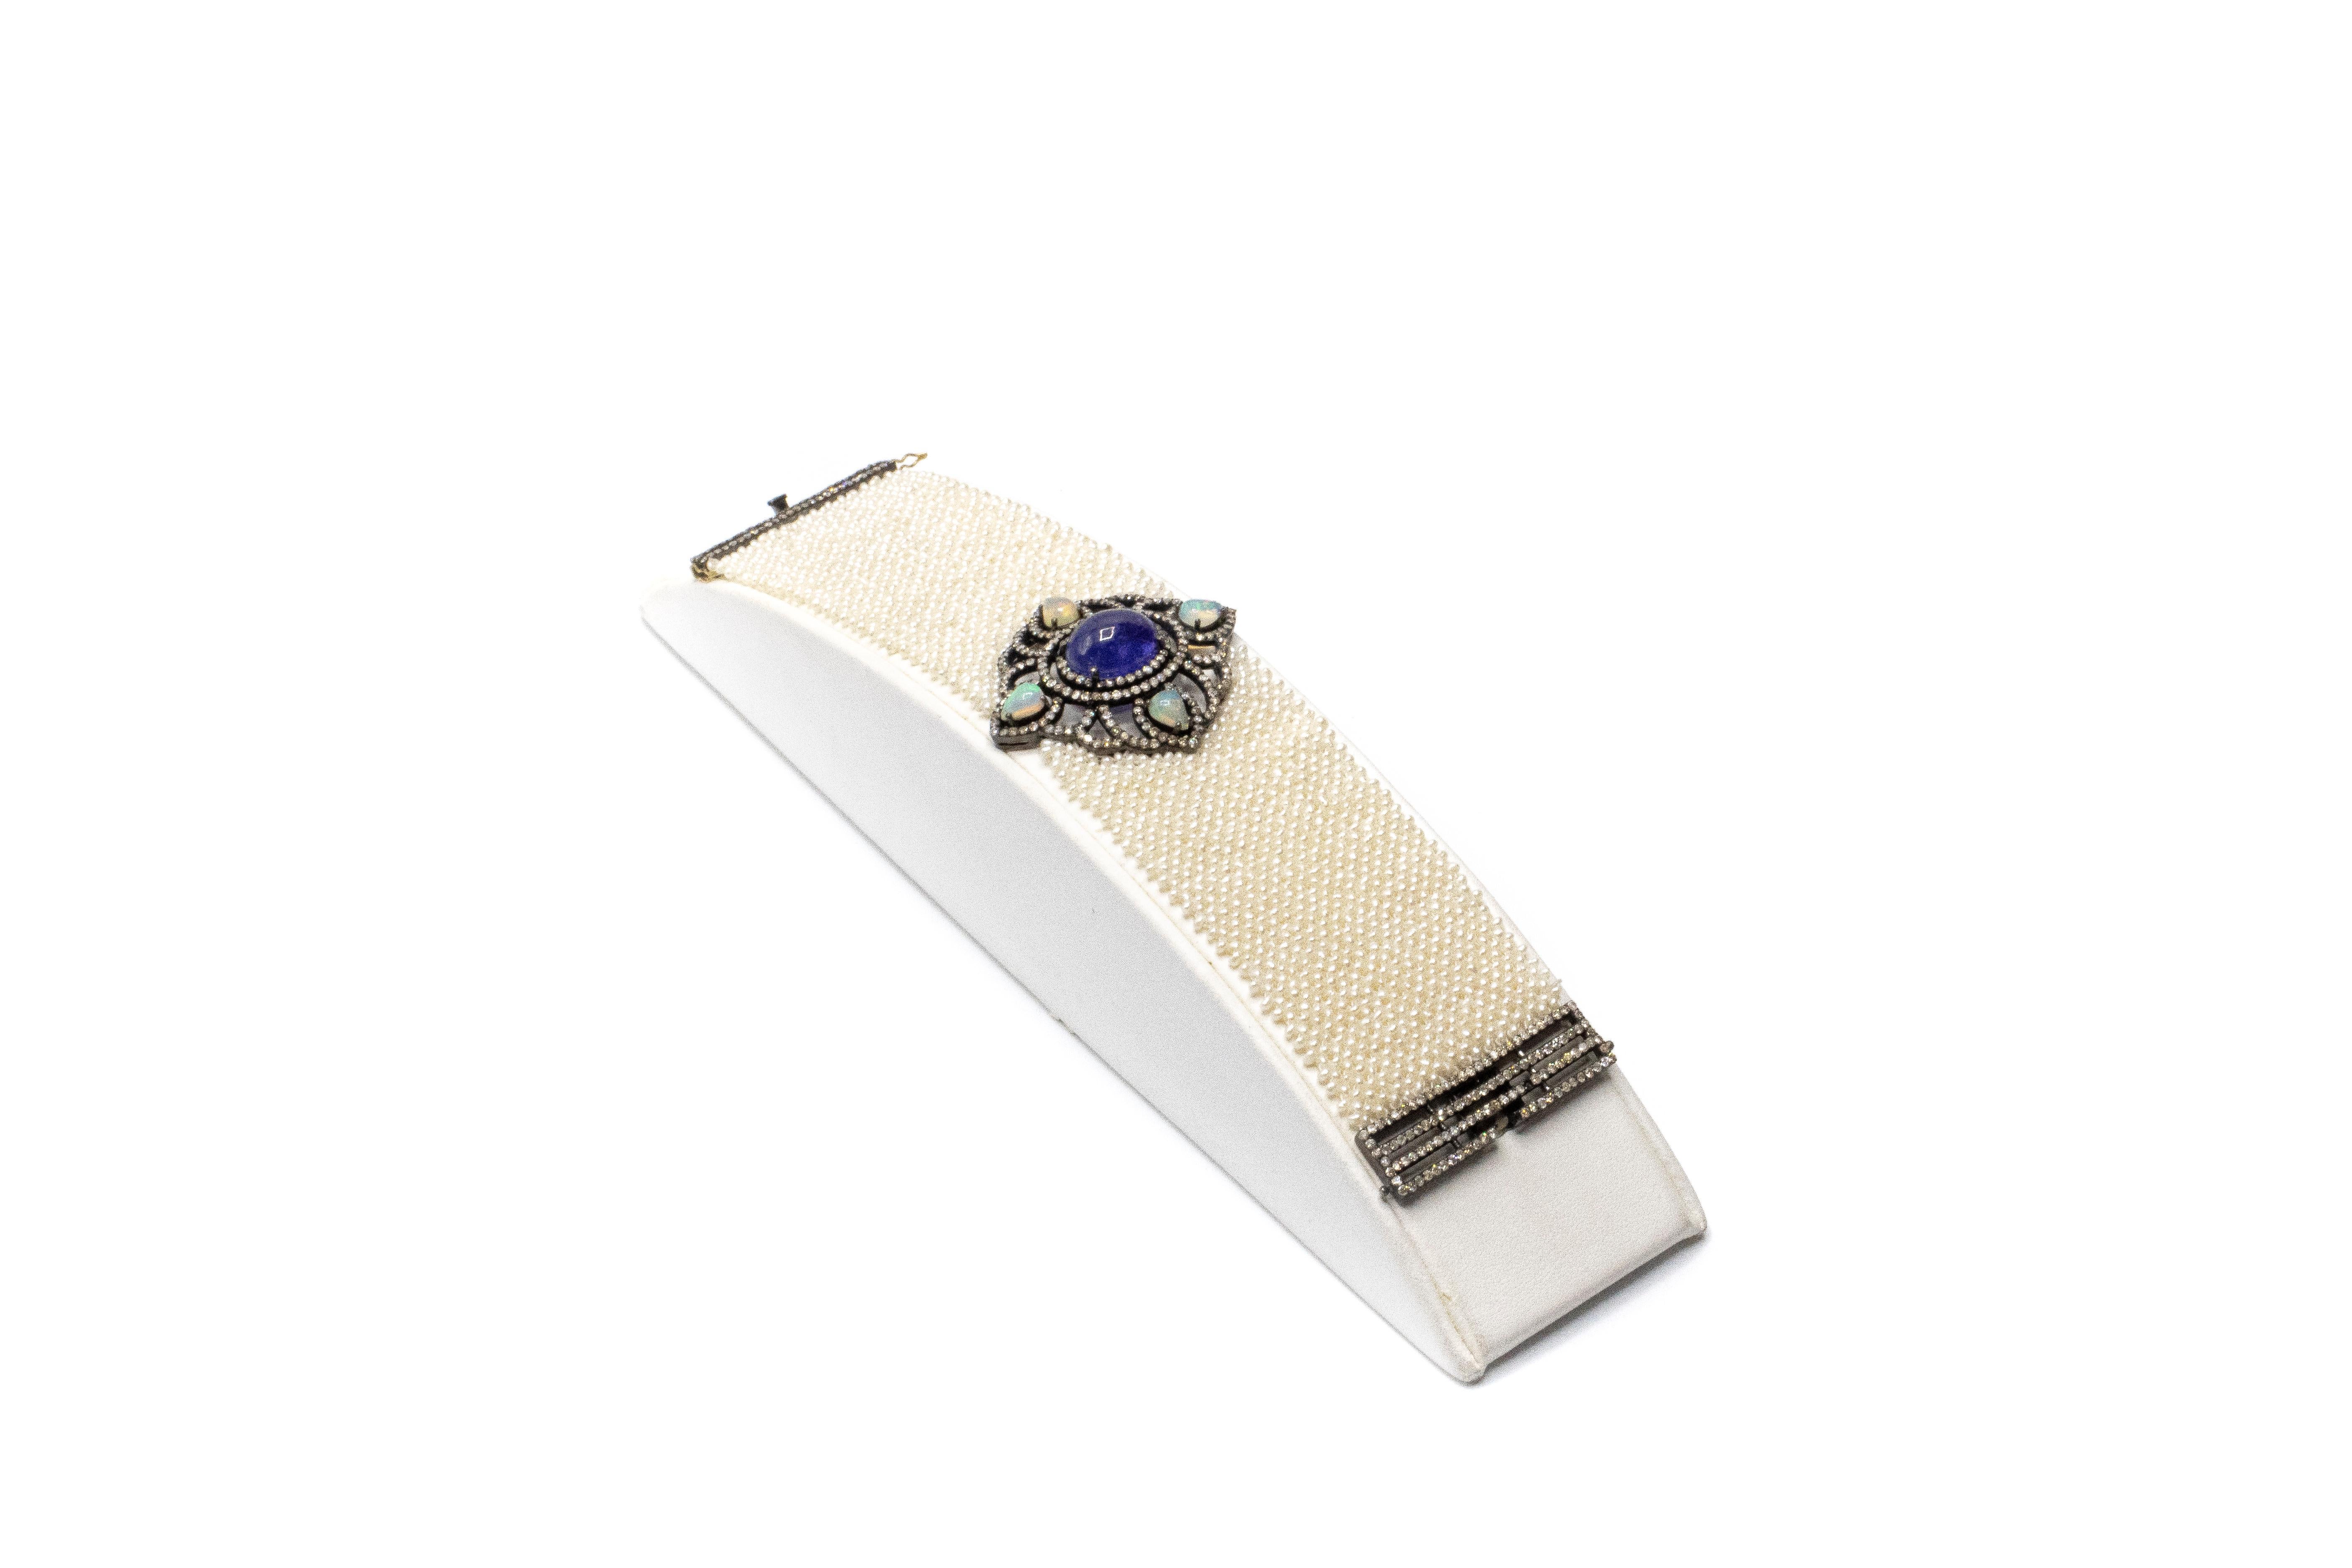 Micro Pearl Tanzanite Welo Opal Diamond Gold and Silver Choker Bracelet. Bracelet is beautifully adorned with four pear shaped Ethiopian Welo opals, a tanzanite cabochon, diamonds and hundreds of multi stranded tiny pearls. Total weight 34.70 grams 